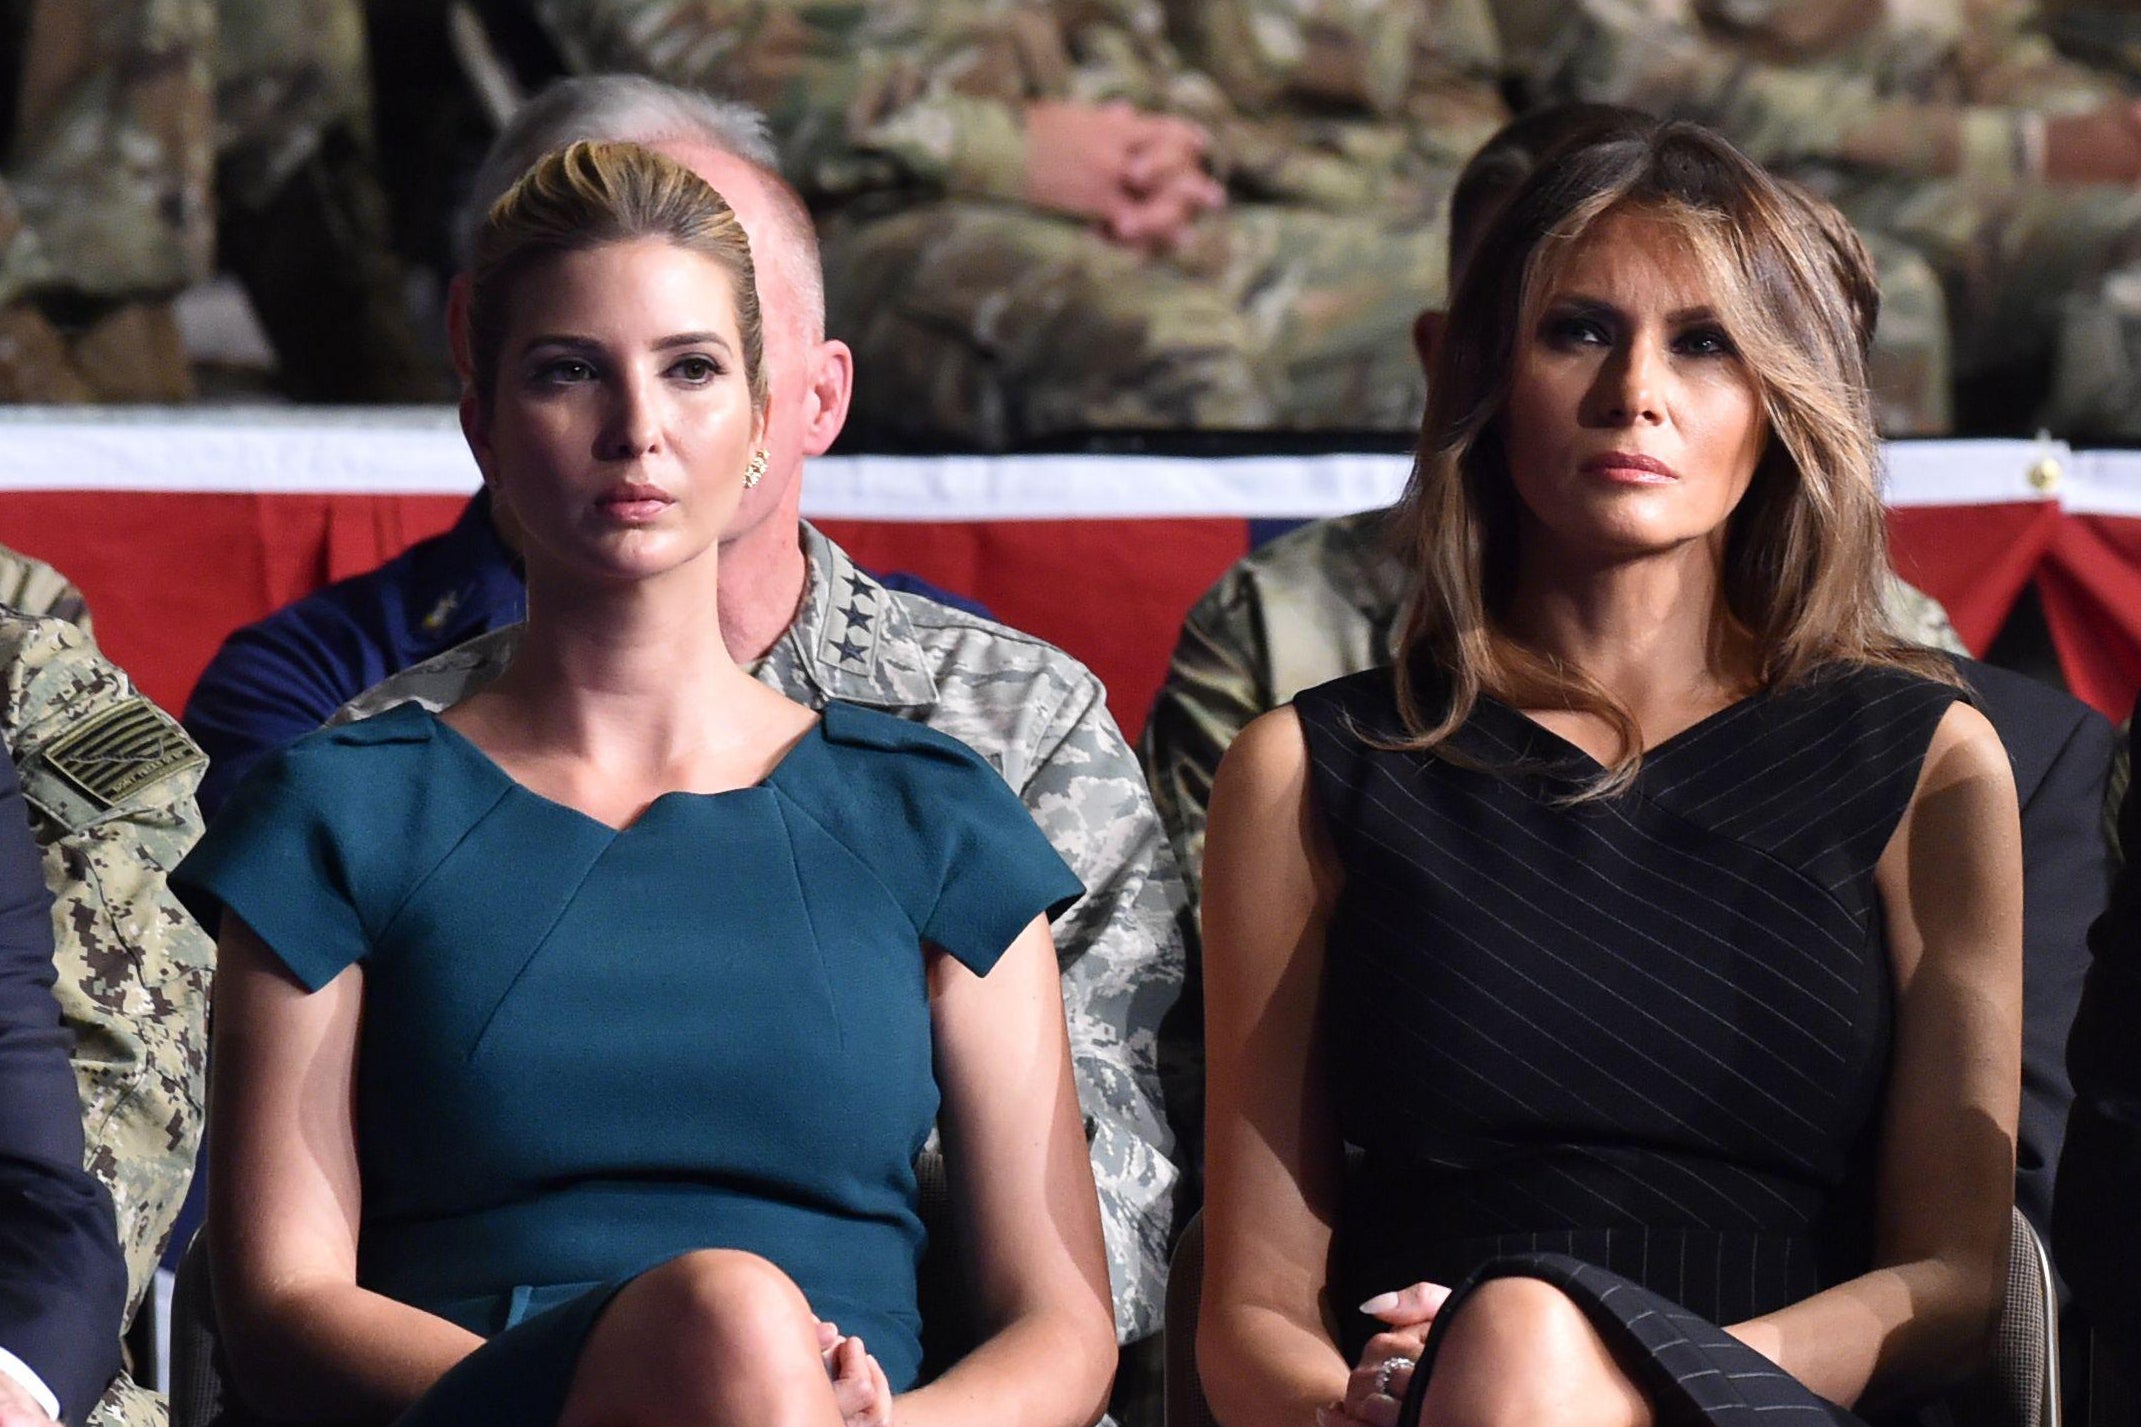 Ivanka Trump and Melania Trump seated side by side.